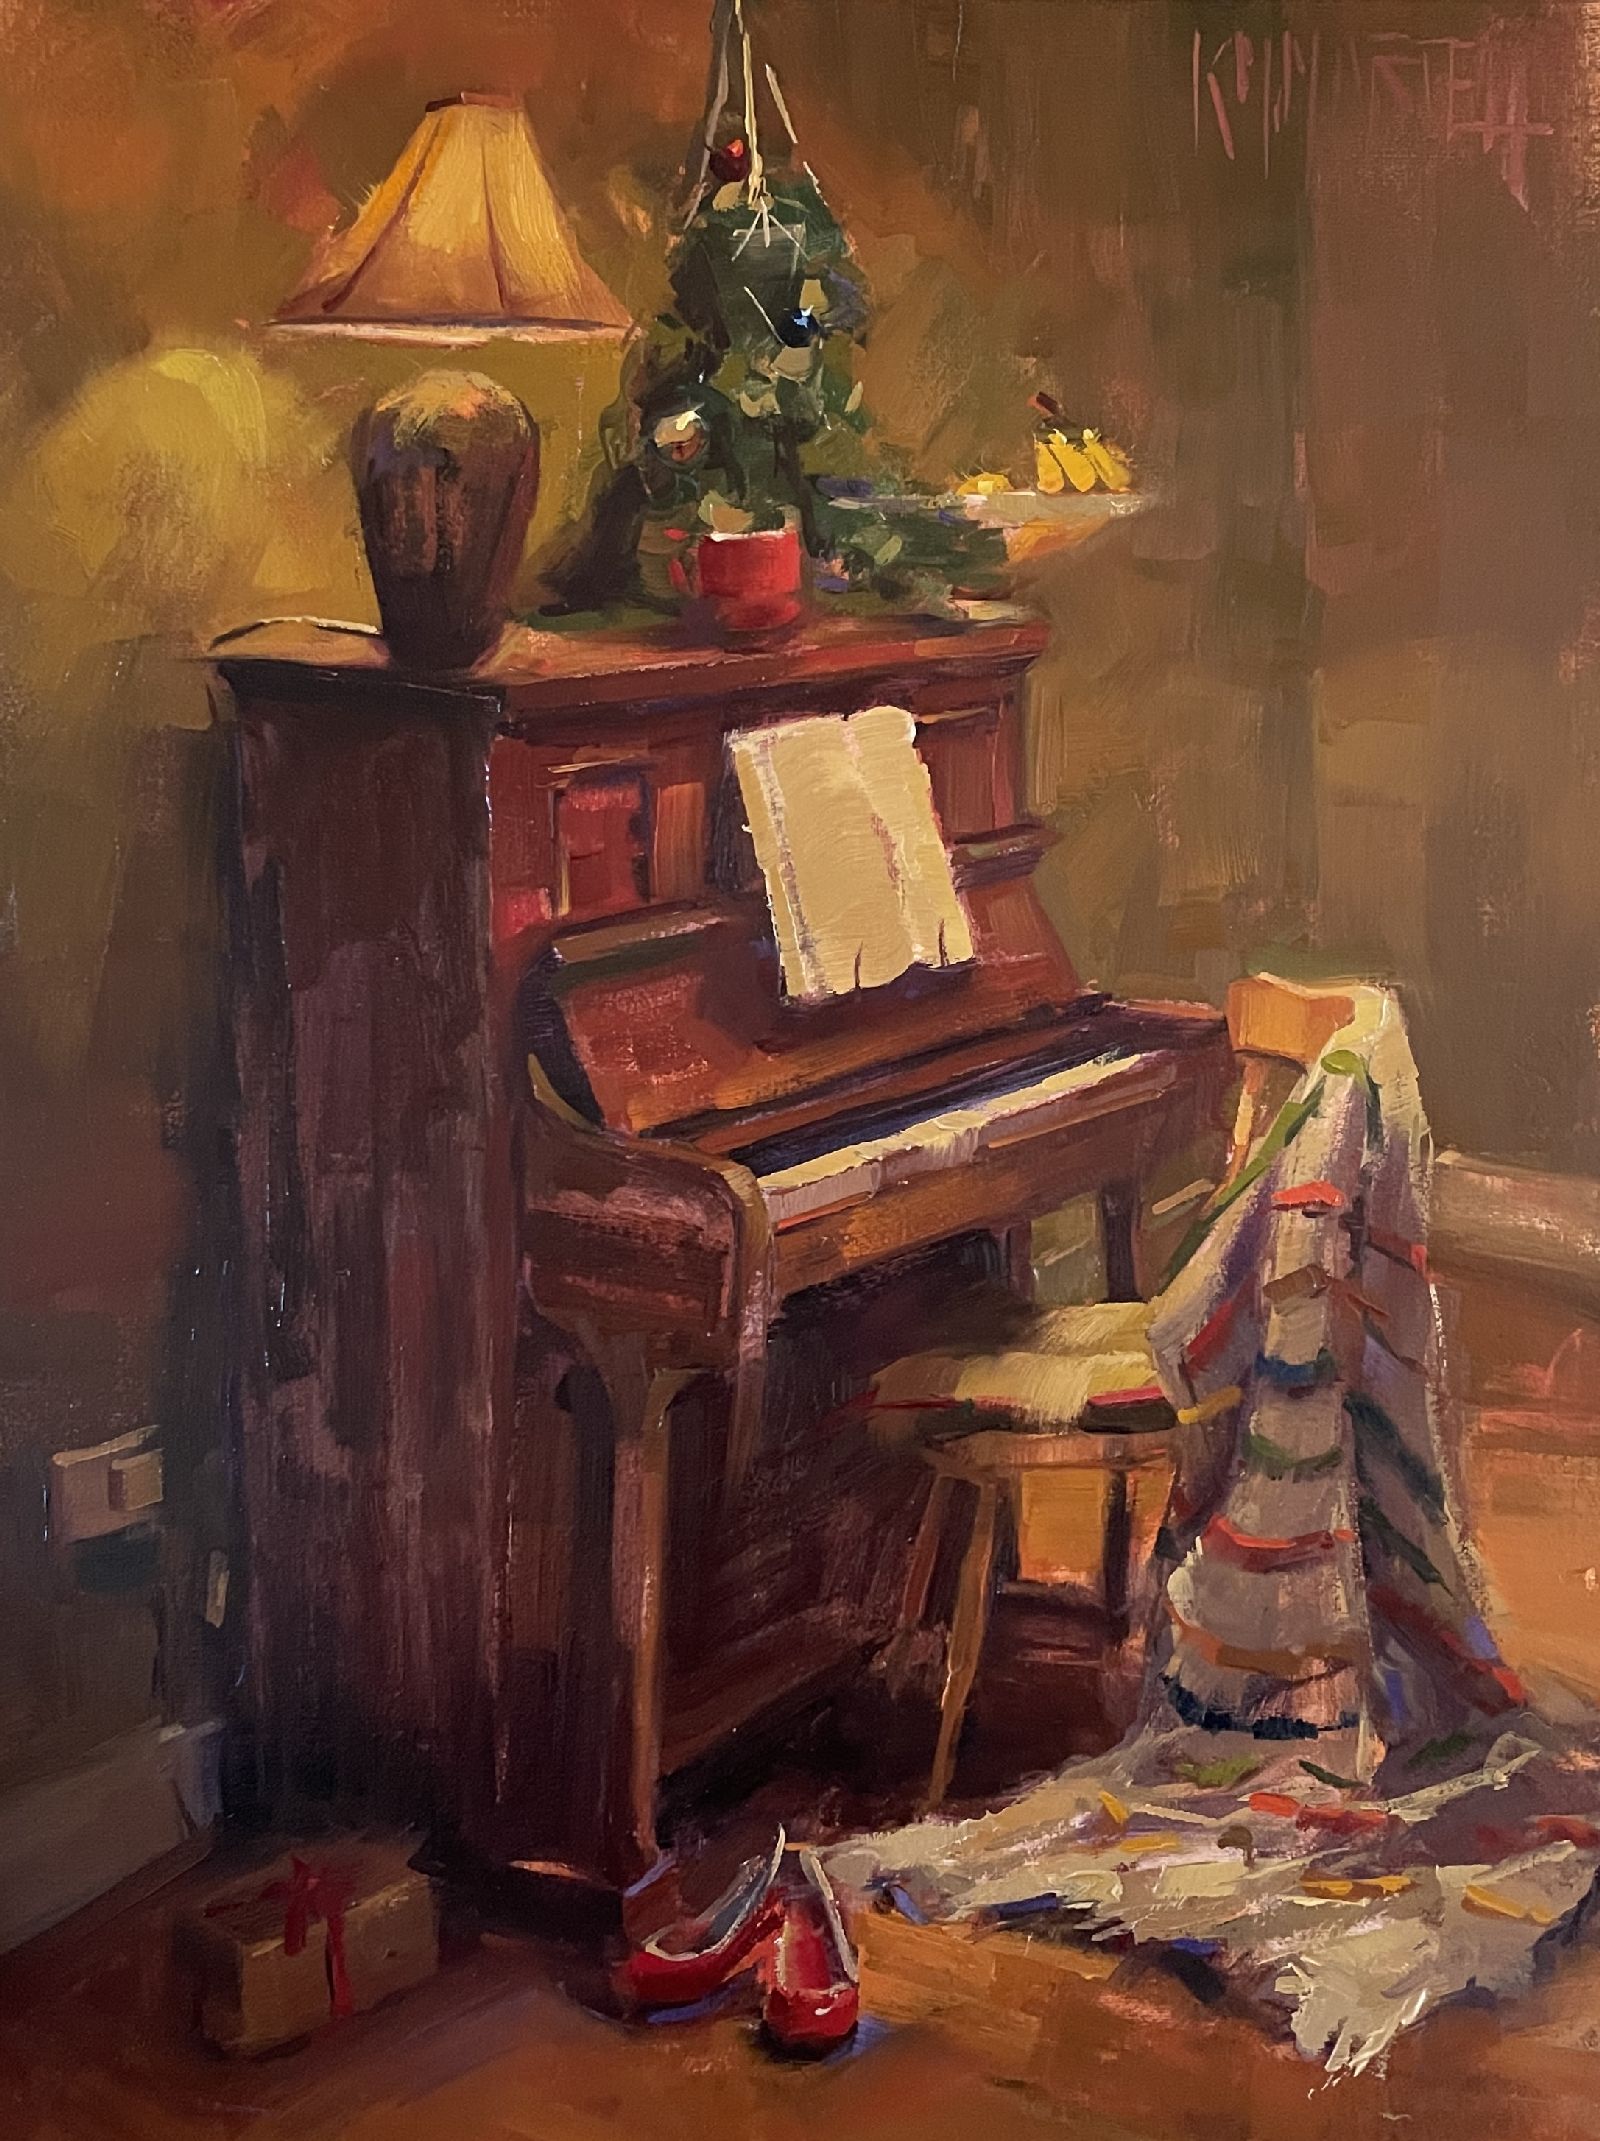  I left you something by the piano by Kayla Martell